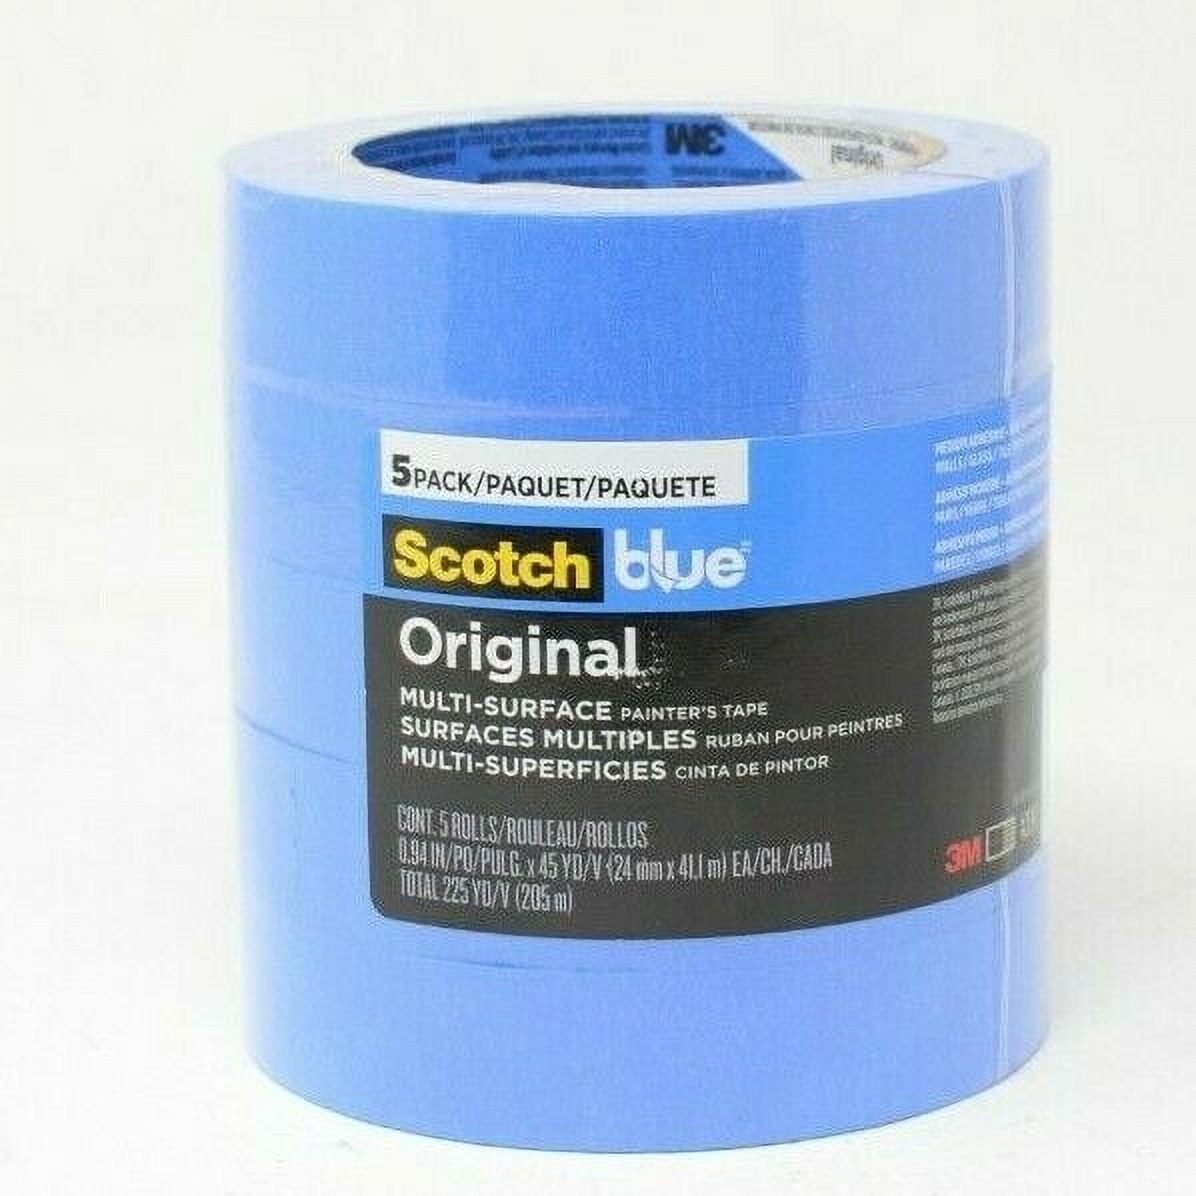 Scotch Blue Painters Tape 3M Original 5 Pack .94 Inch 225 Yards Total  Removable